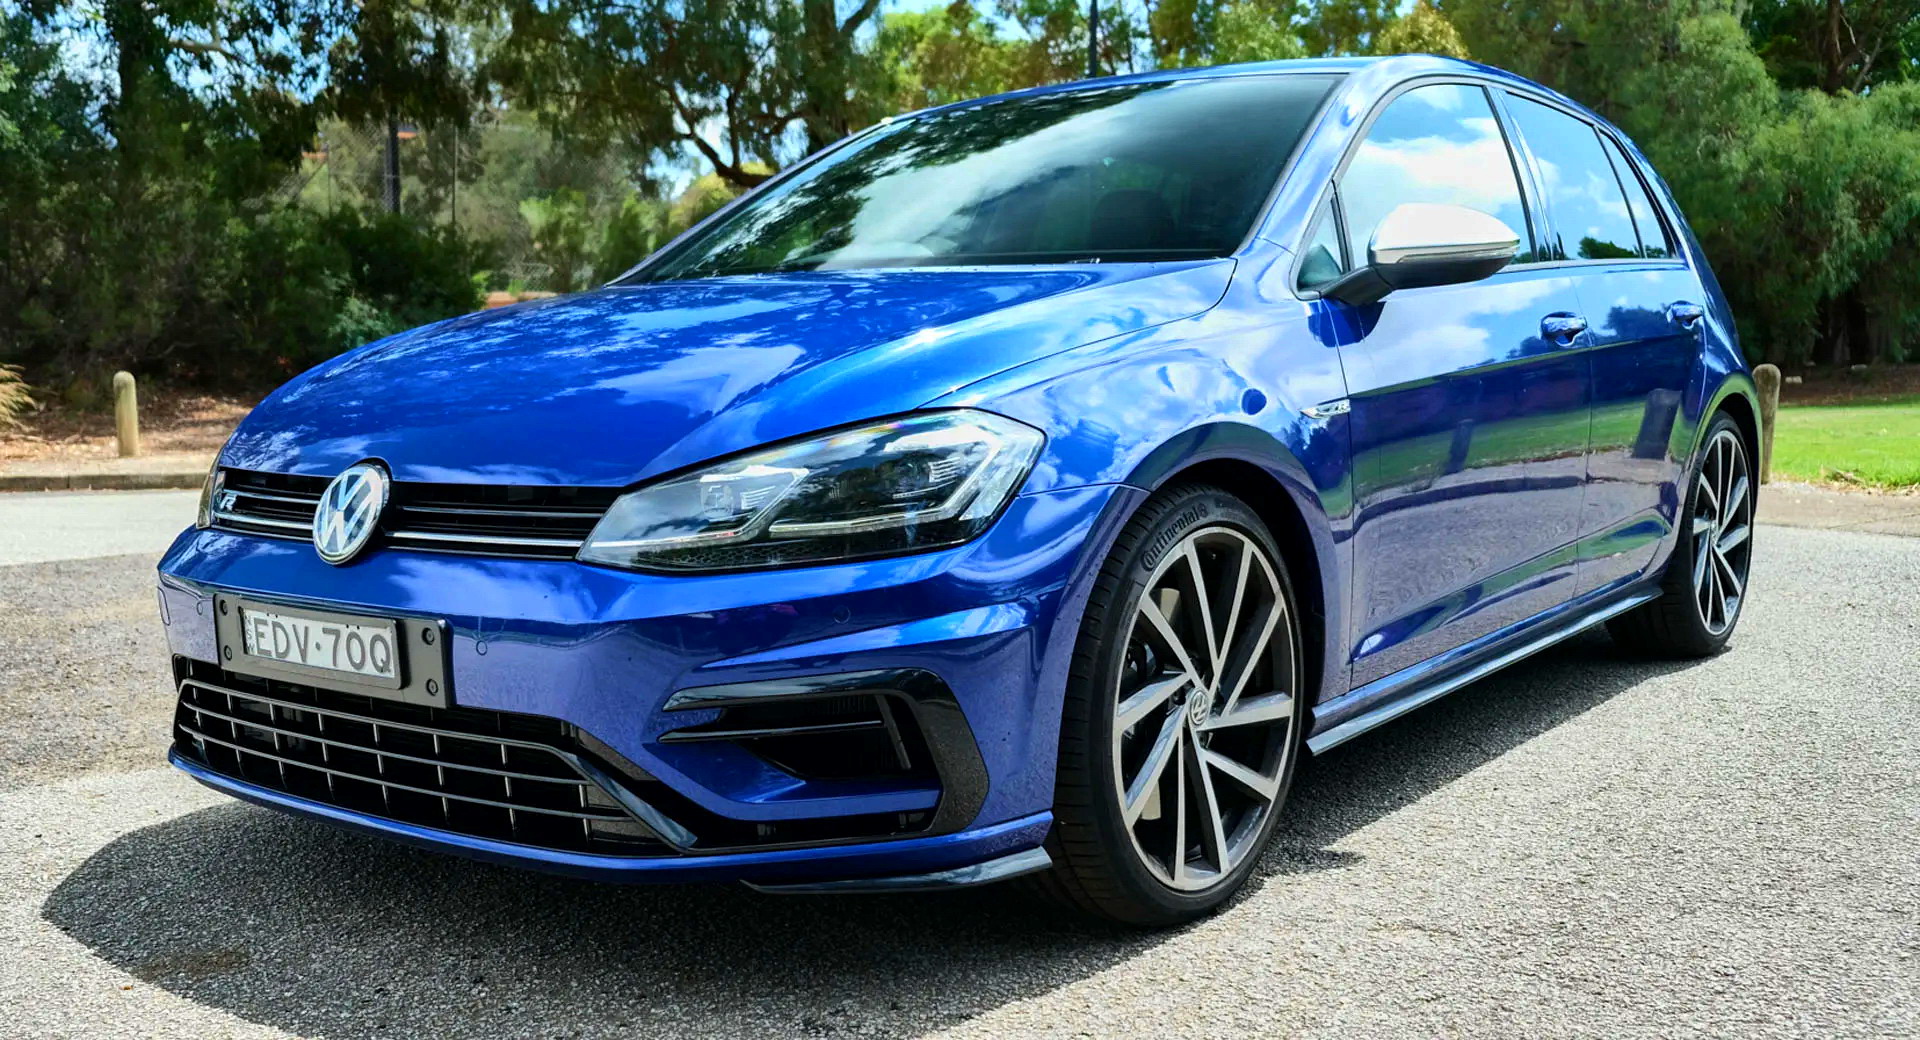 There's A New VW Golf R Mk8 Coming, So We Drove The Old One For A Week